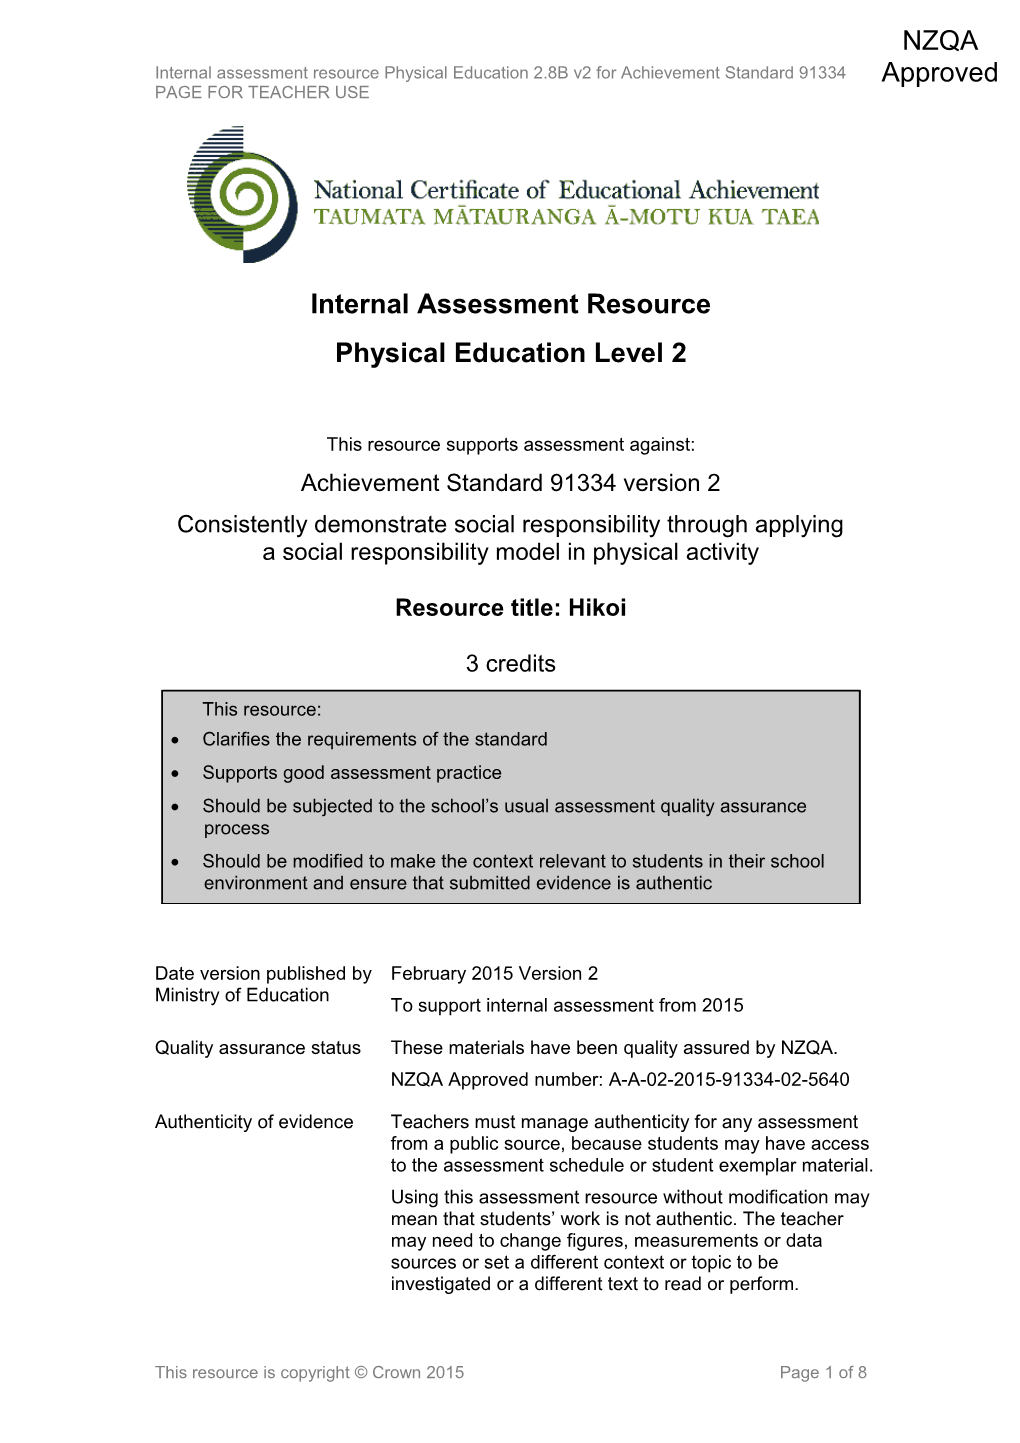 Level 2 Physical Education Internal Assessment Resource